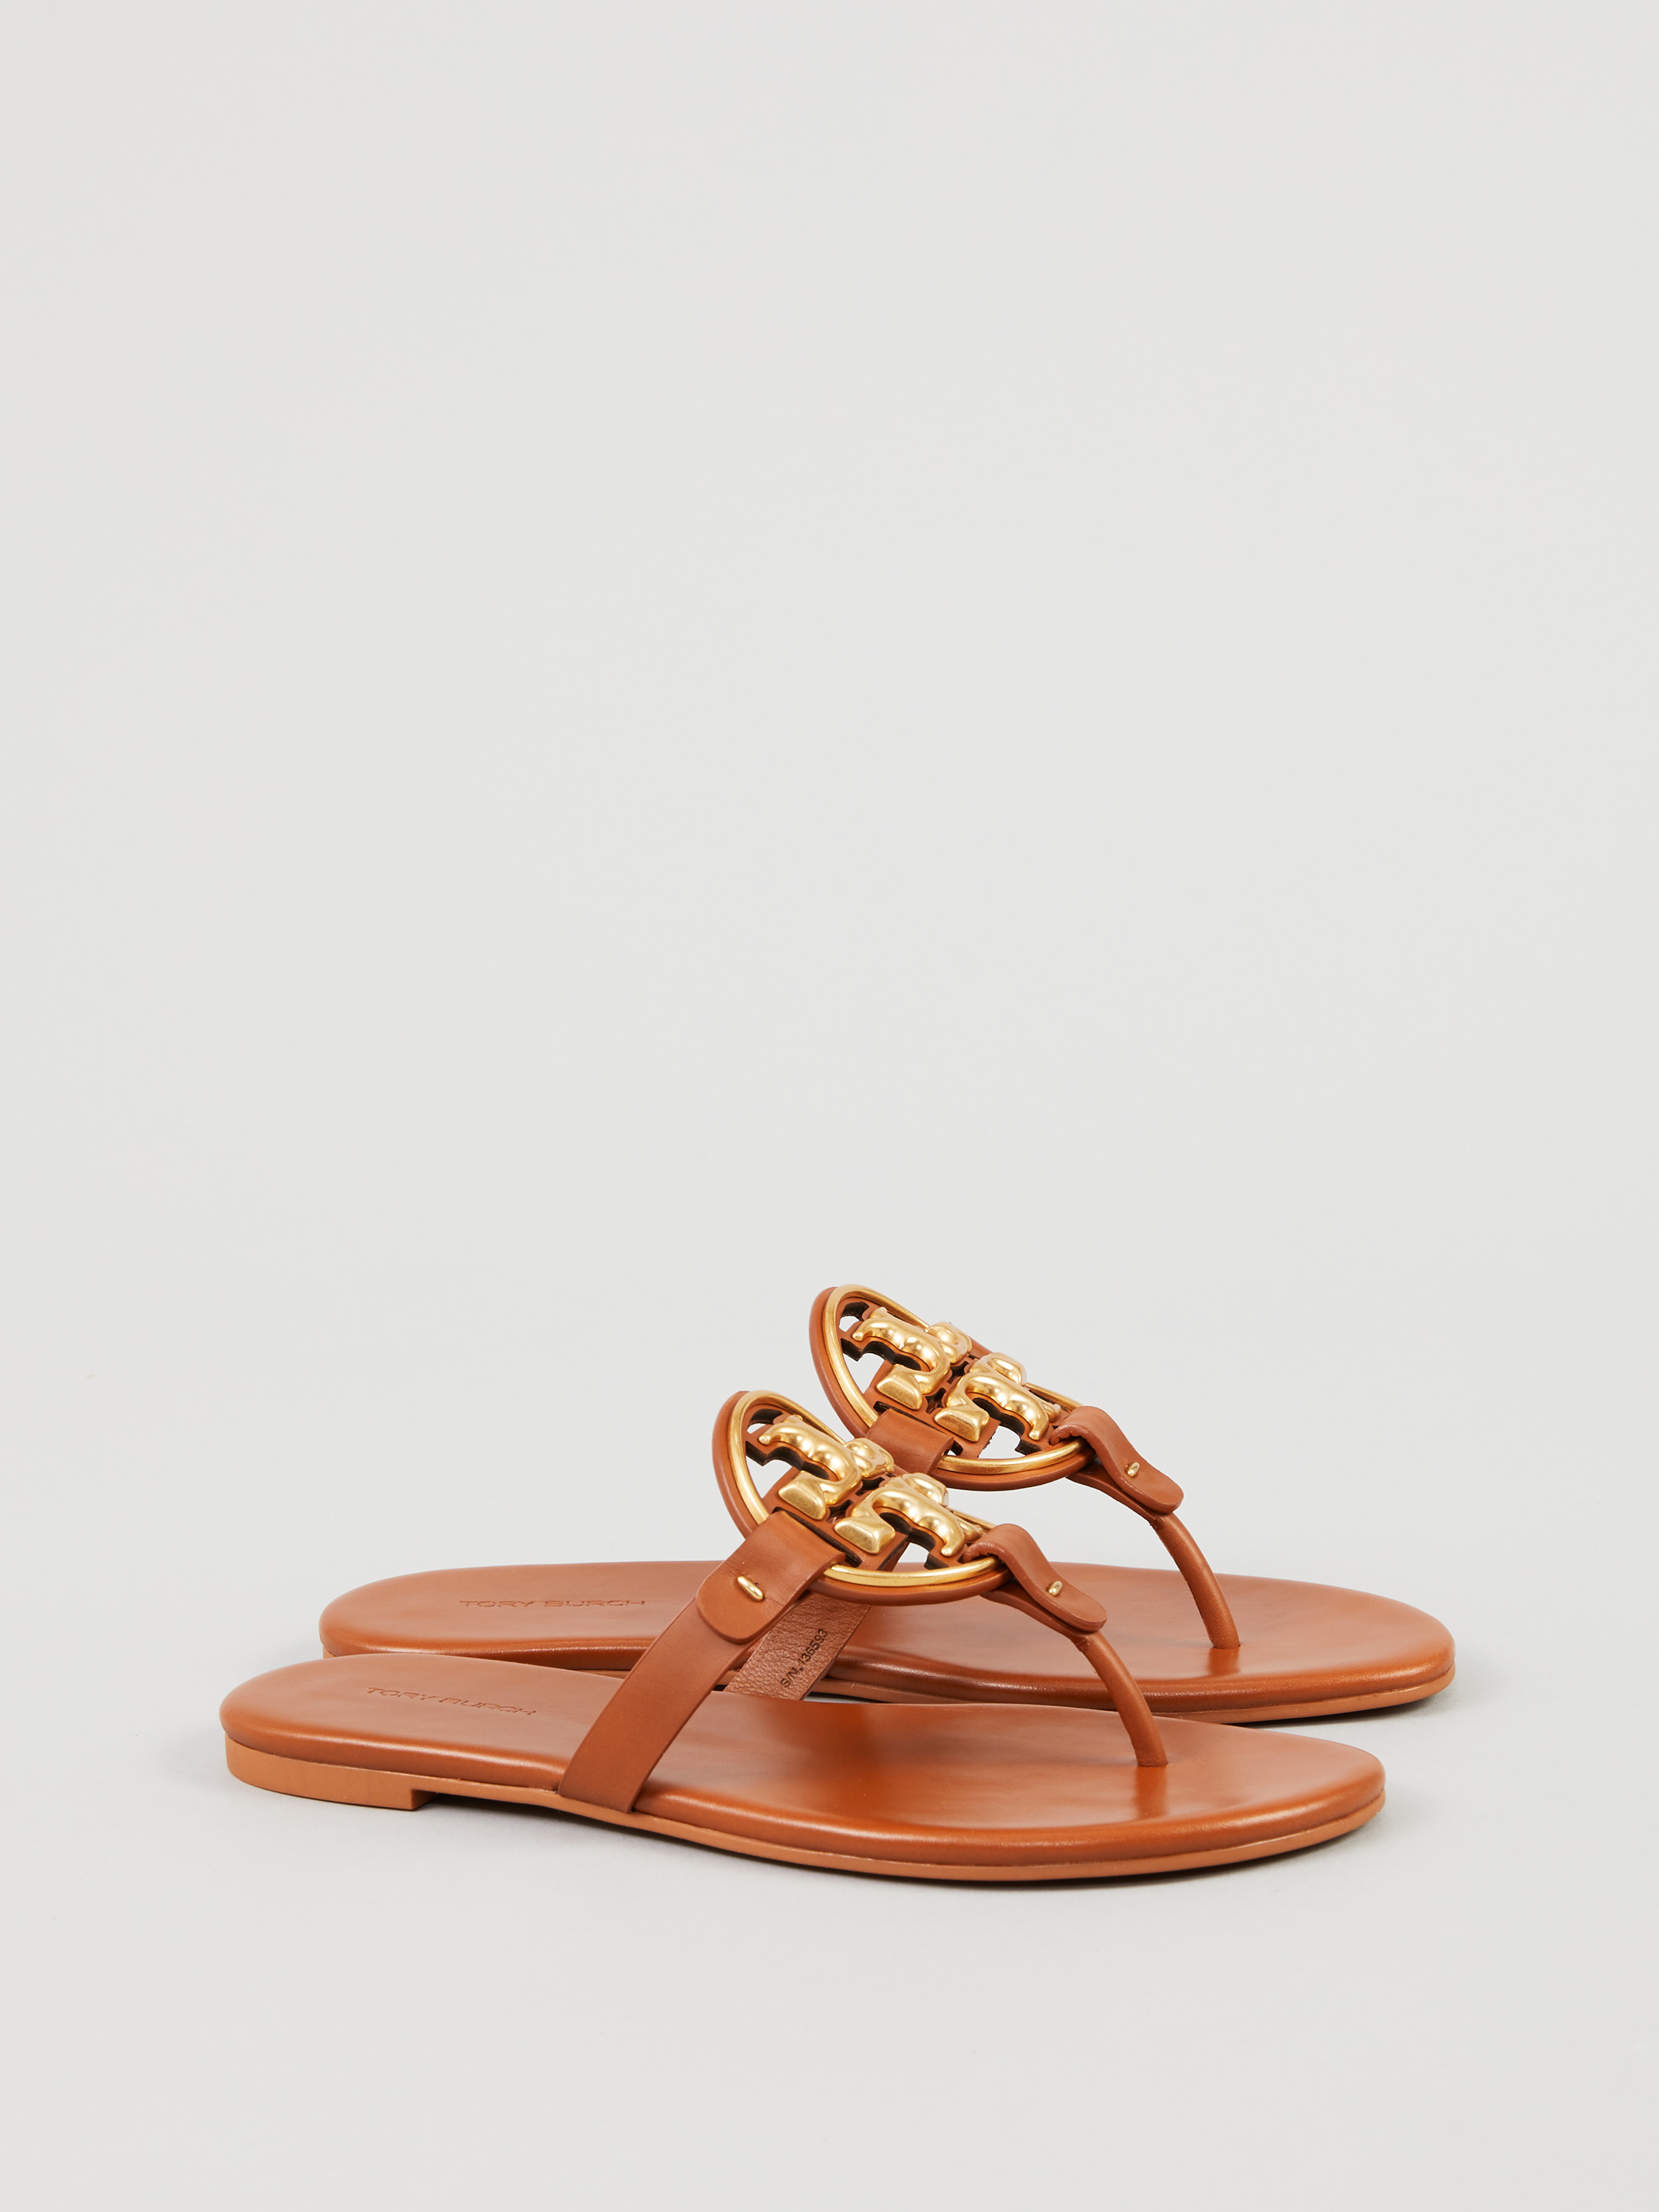 Shop Tory Burch Miller Leather Thong Sandals Saks Fifth Avenue |  